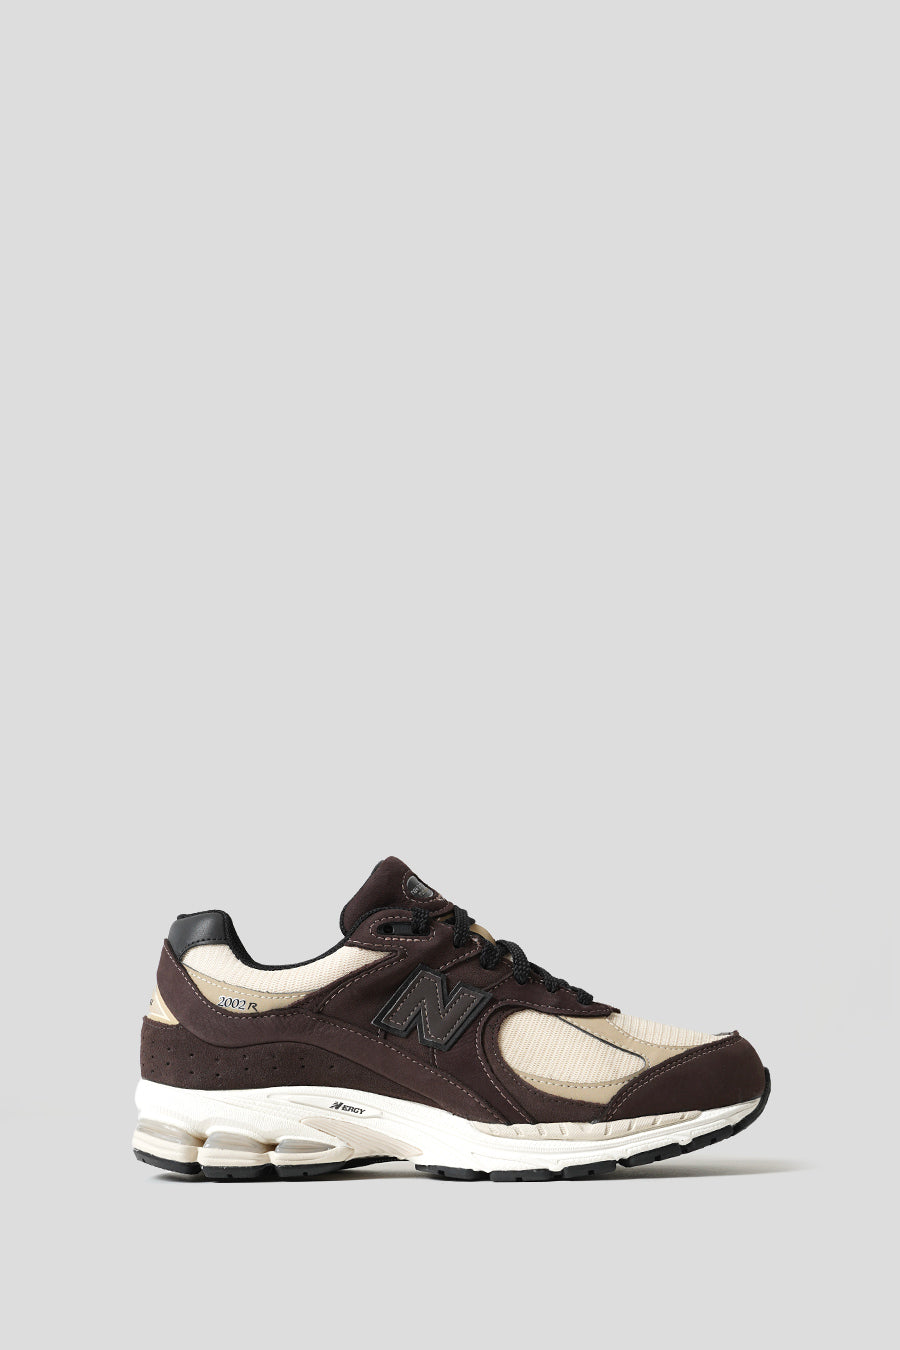 NEW BALANCE - 2002RX BLACK COFFEE AND SANDSTONE SNEAKERS - LE LABO STORE